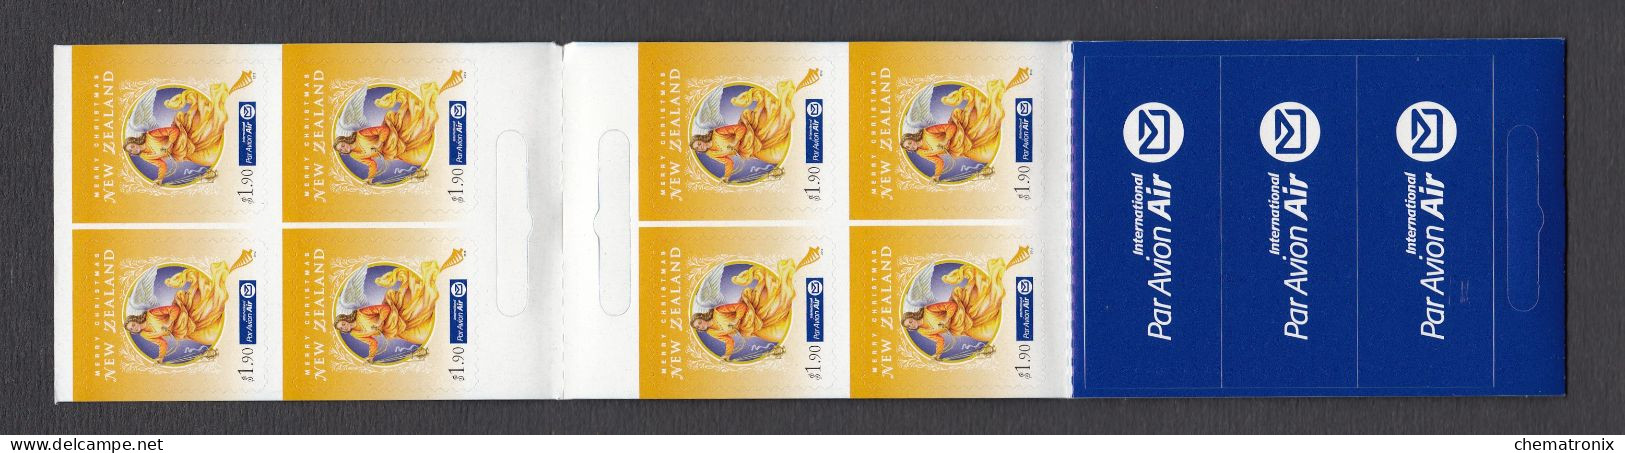 New Zealand 2012 - Christmas - Self-Adhesive Booklet - MNH ** - Carnets